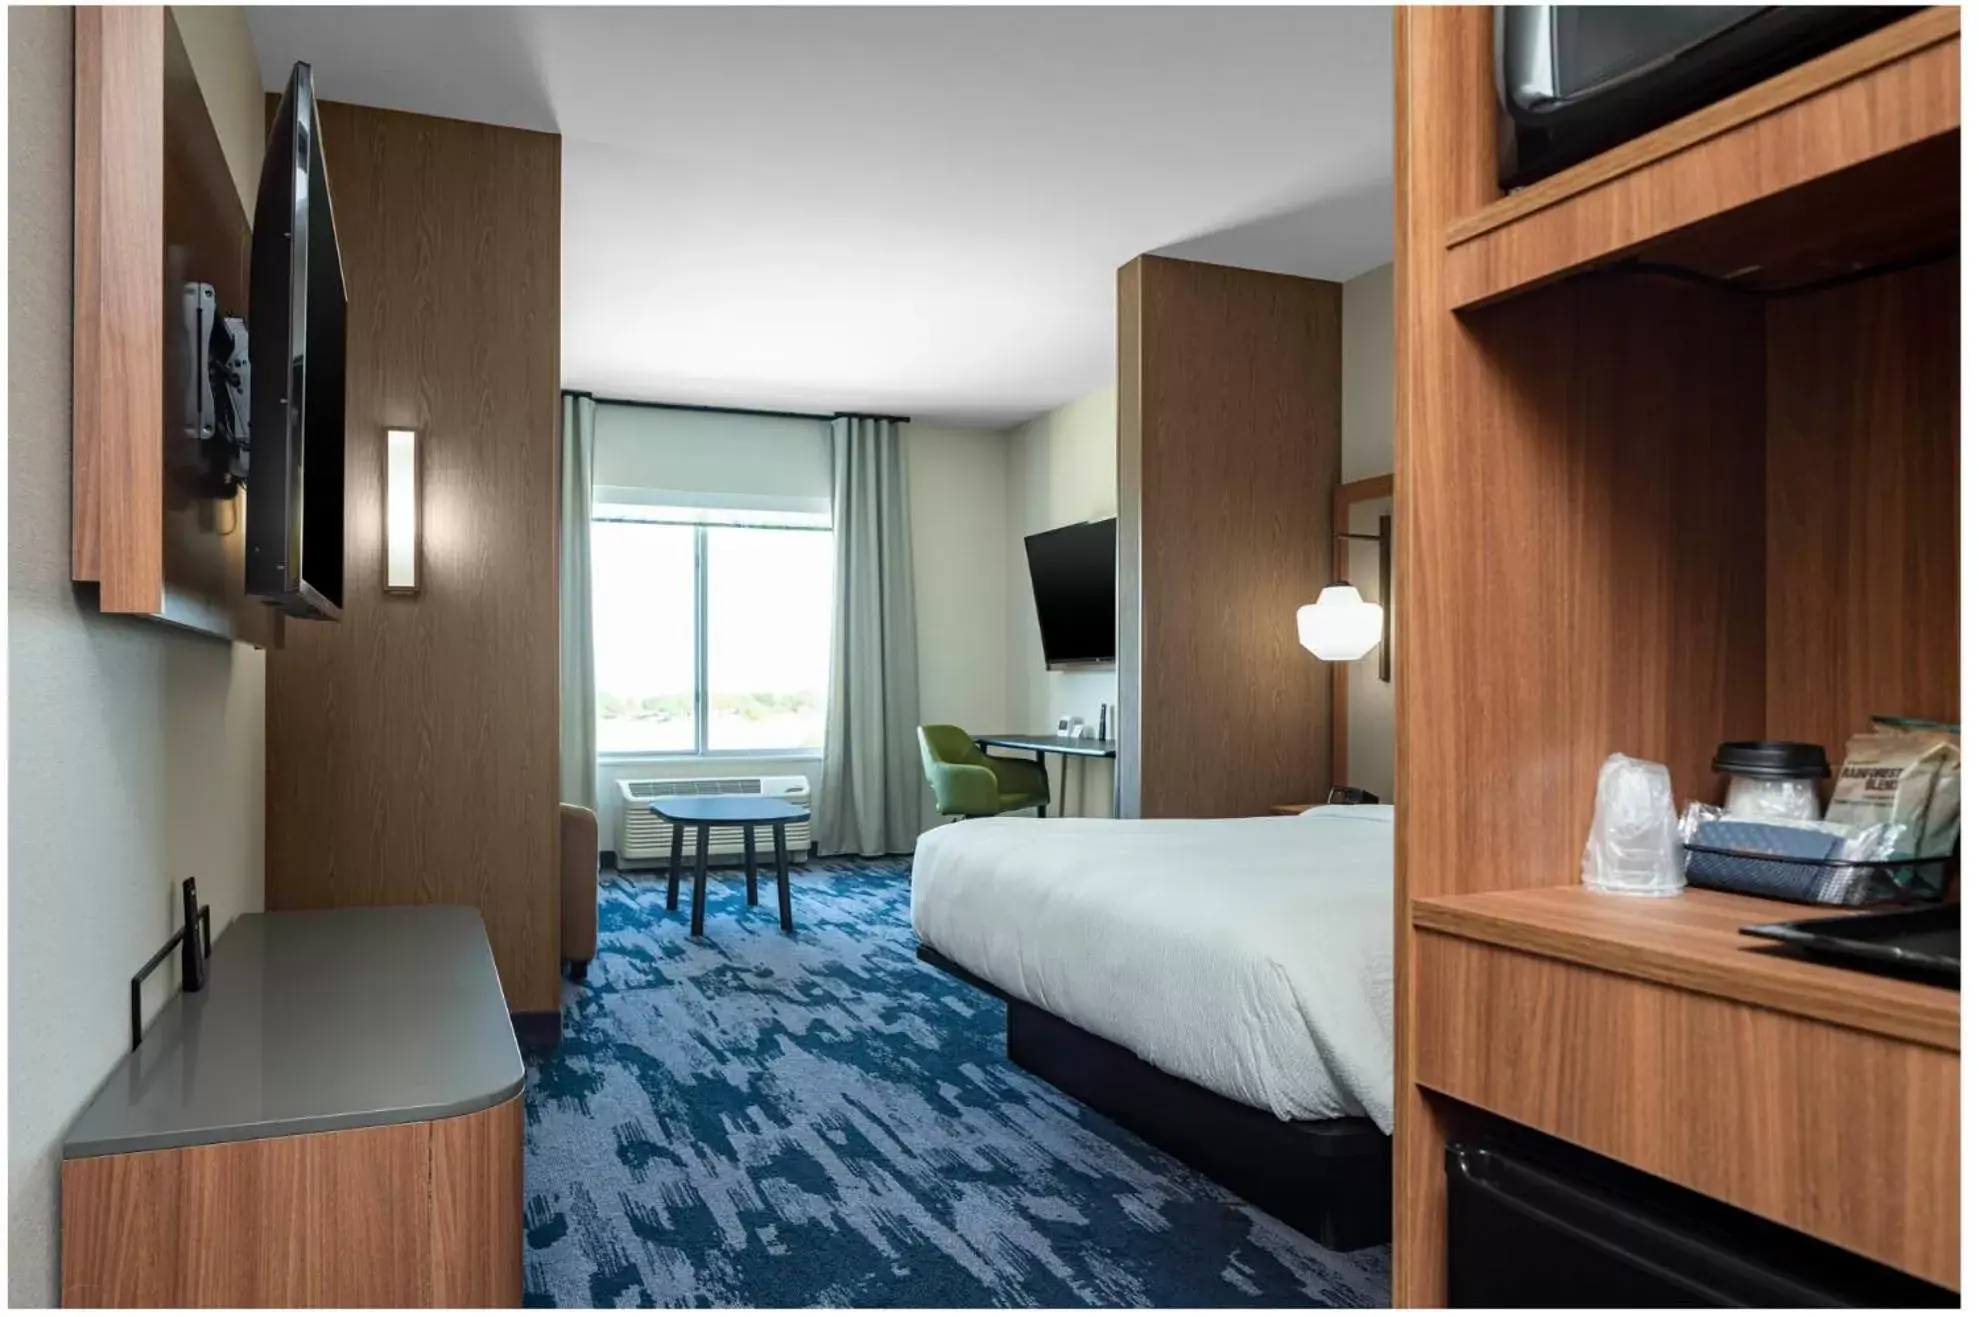 Fairfield by Marriott Inn & Suites Dallas DFW Airport North, Irving